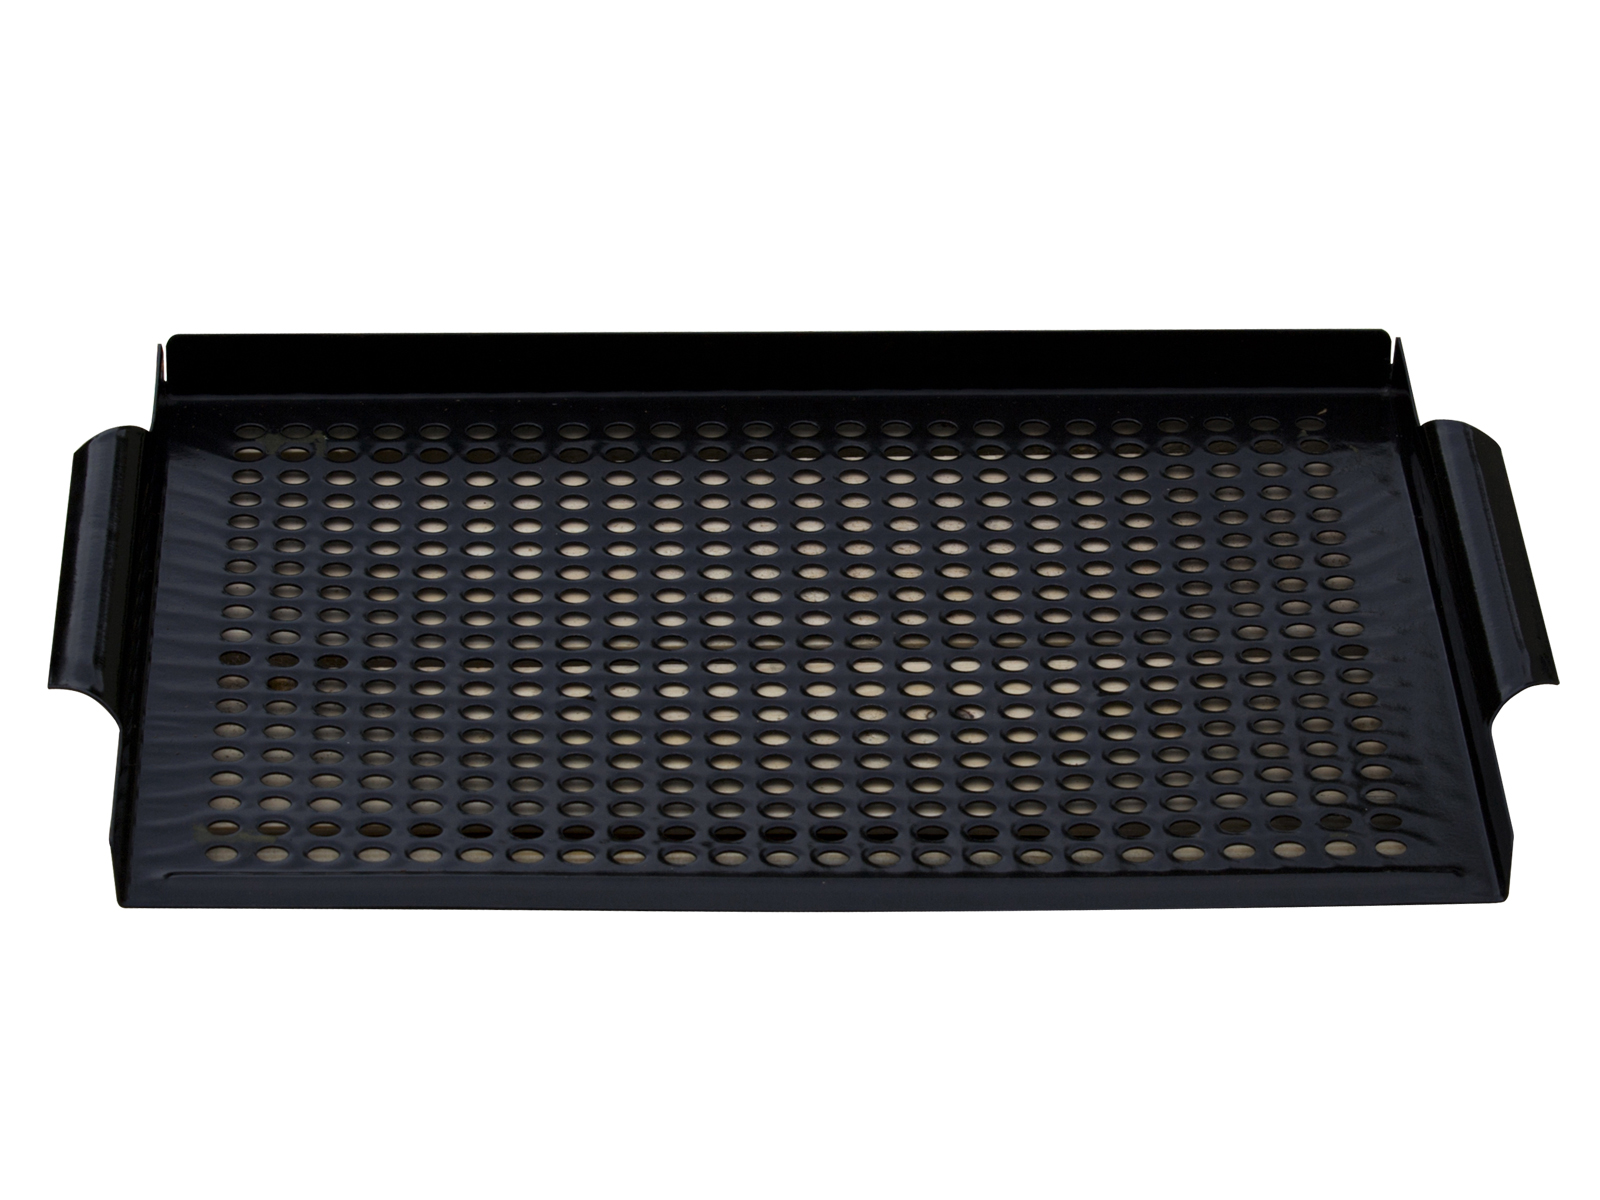 BBQ 870005 Premium Grill Topper Grilling Grid, Nonstick, 16 by 12-Inches